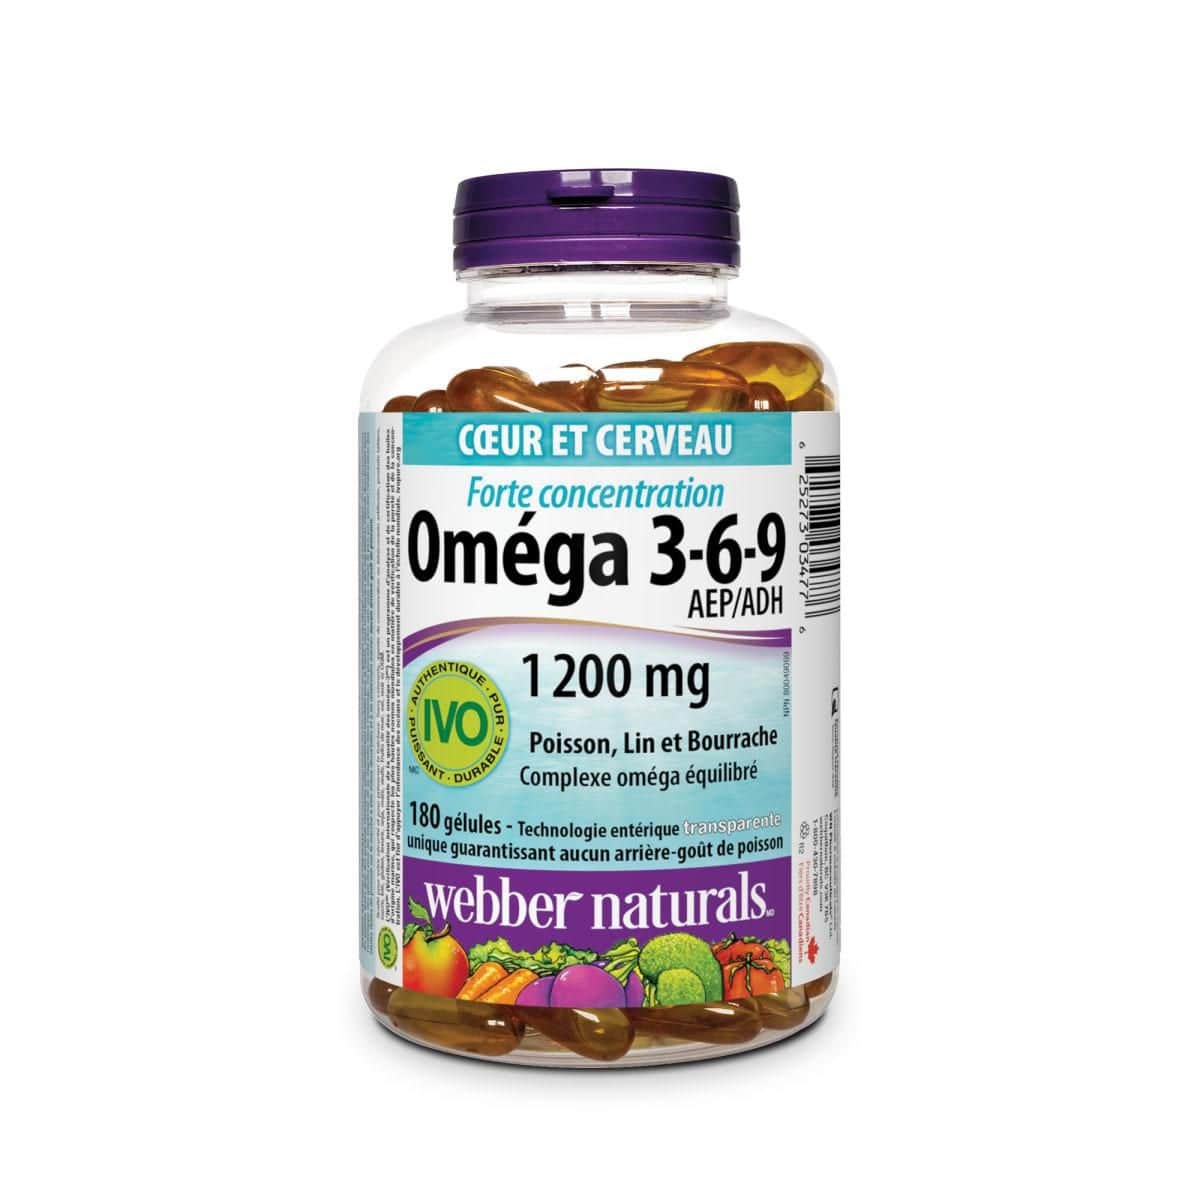 Product label for webber naturals Omega-3-6-9 1200 mg Fish, Flax, Borage (180 softgels) in French